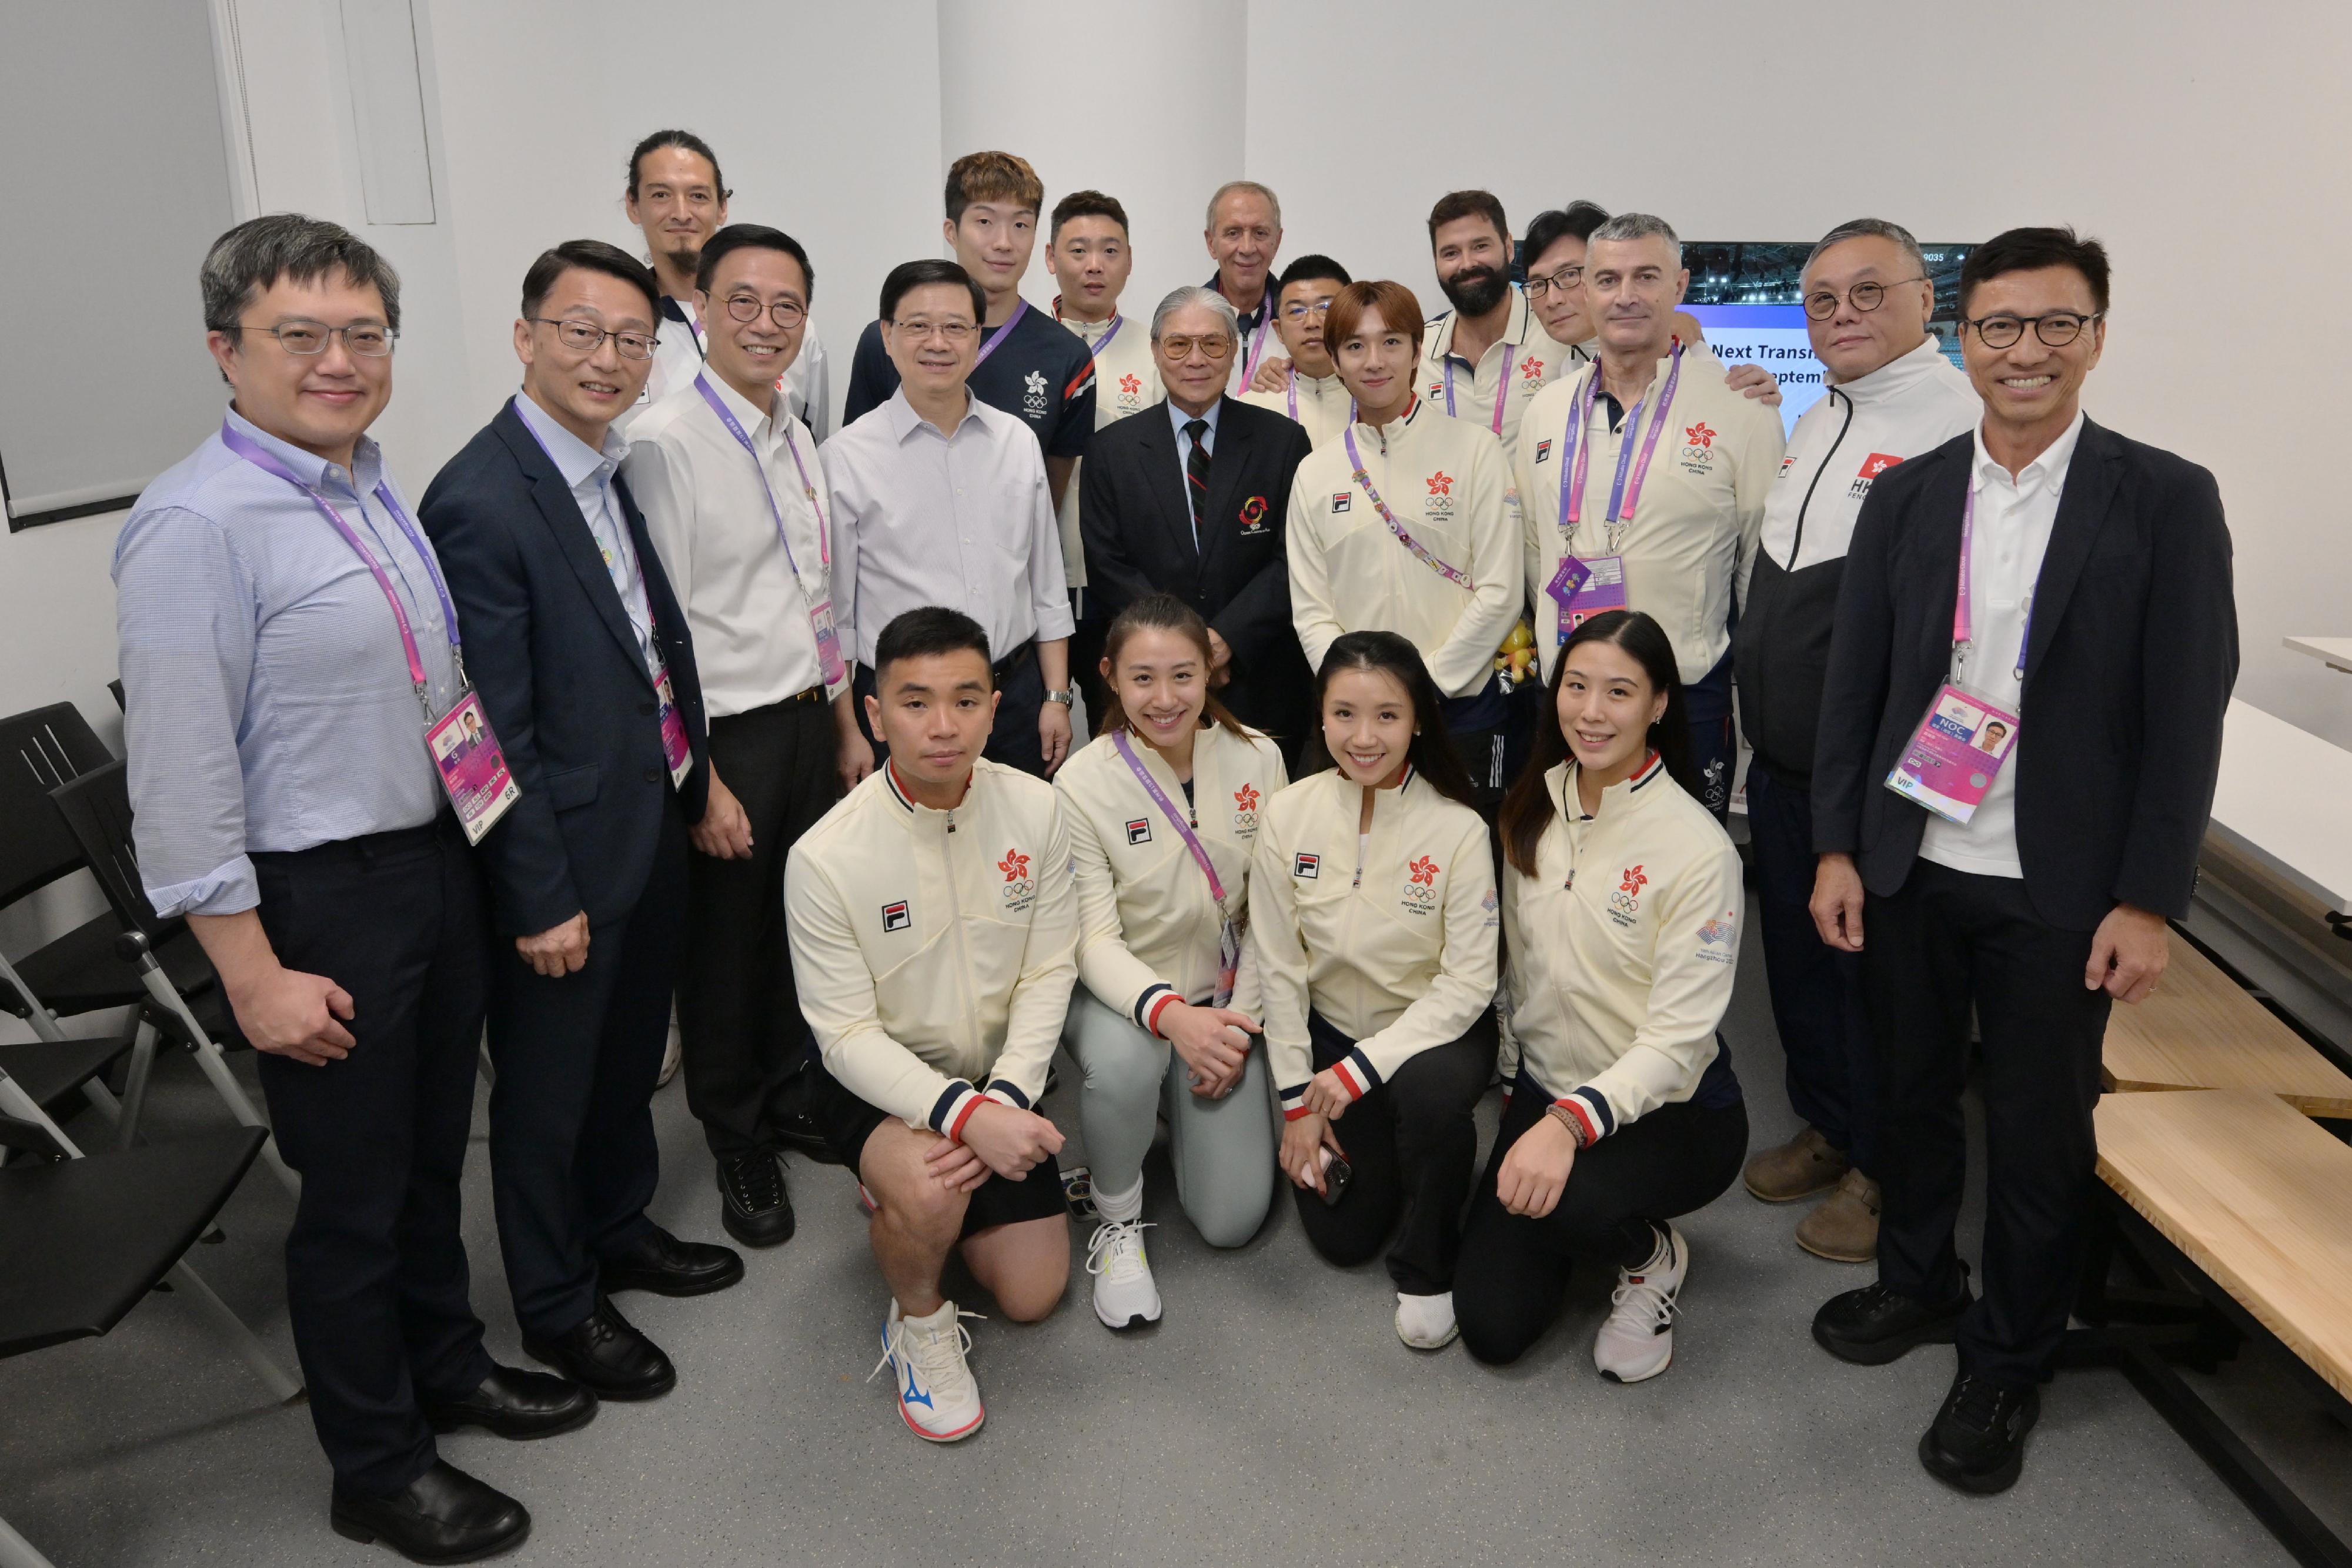 The Chief Executive, Mr John Lee, led a Hong Kong Special Administrative Region Government delegation to Hangzhou and continued his visit programme on September 24. Photo shows Mr Lee (second row, fourth left); the Secretary for Culture, Sports and Tourism, Mr Kevin Yeung (second row, third left); the Director of Leisure and Cultural Services, Mr Vincent Liu (second row, second left); the Commissioner for Sports in the Culture, Sports and Tourism Bureau, Mr Sam Wong (second row, first right); and the President of the Sports Federation & Olympic Committee of Hong Kong, China, Mr Timothy Fok (second row, fifth left), with Hong Kong fencing athletes.